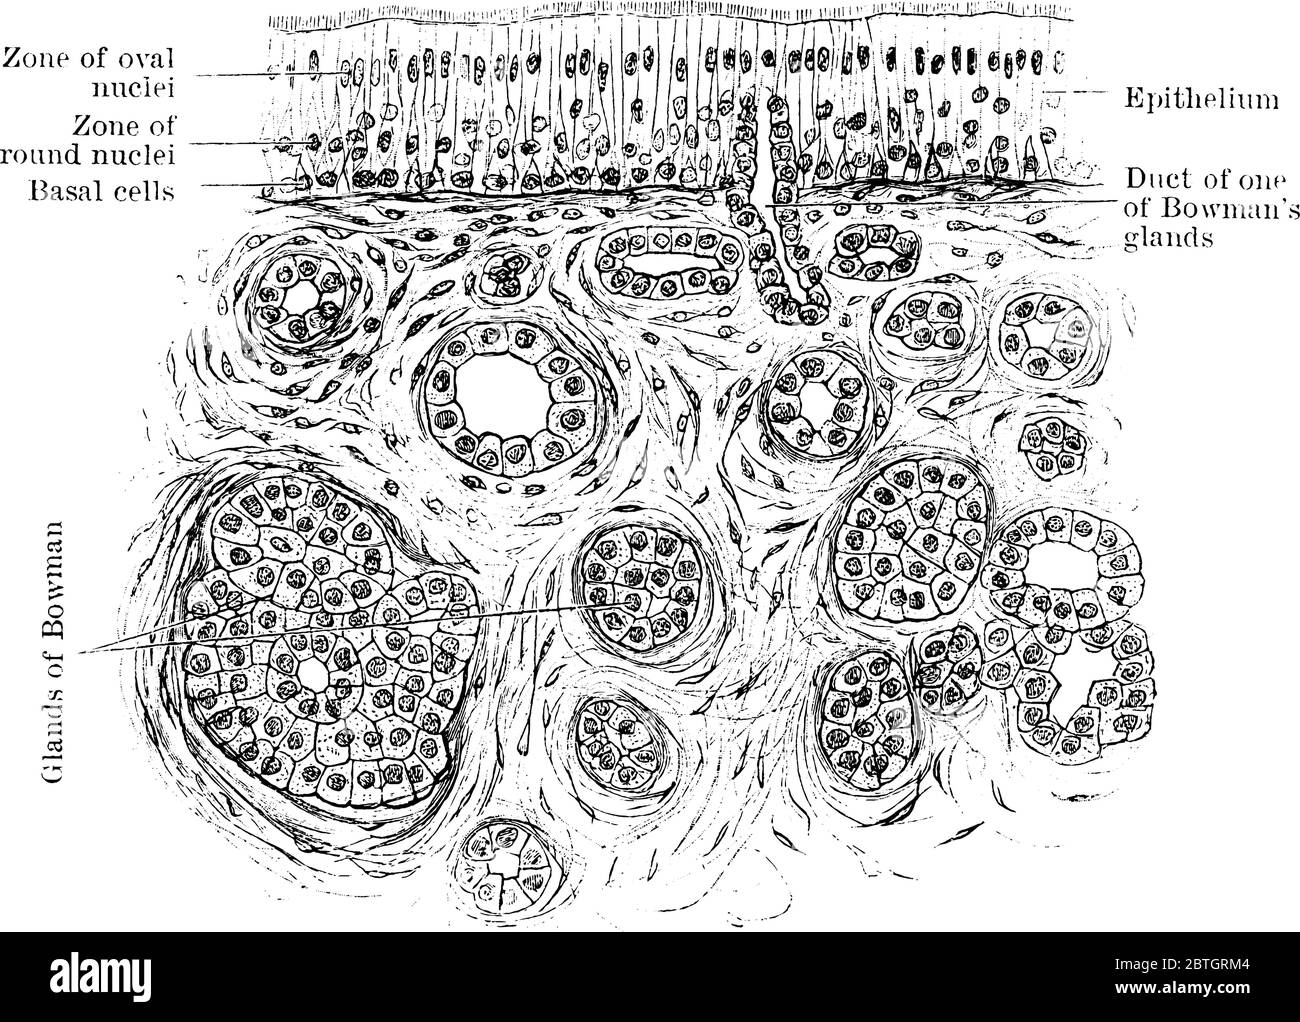 The section through the olfactory mucus membrane, with the parts labeled as zone of oval and round nuclei, basal cells, epithelium and so on, vintage Stock Vector